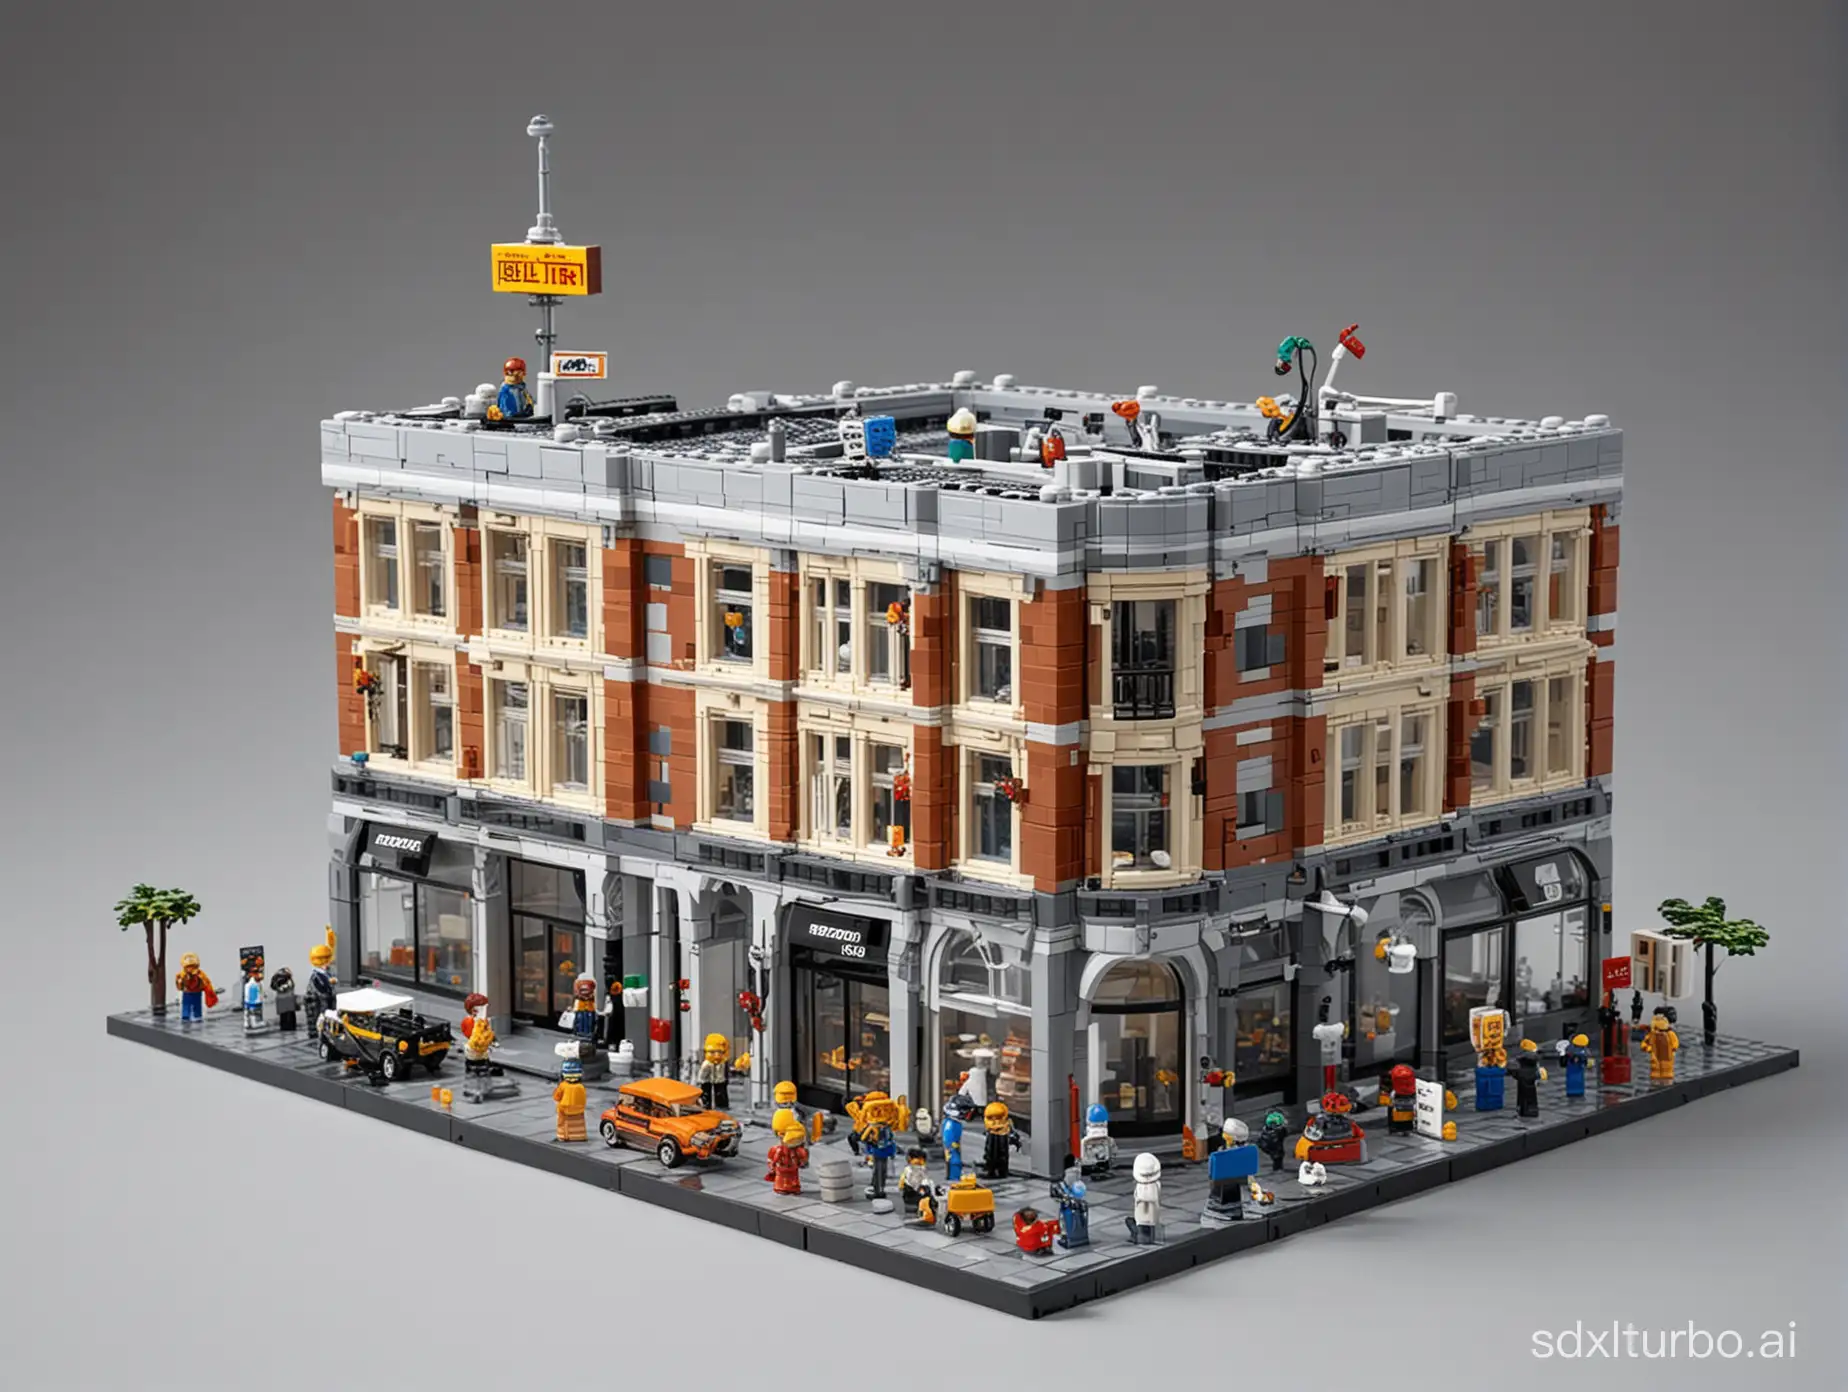 Representation of the concept of selling as a Lego building, as it will look in the future